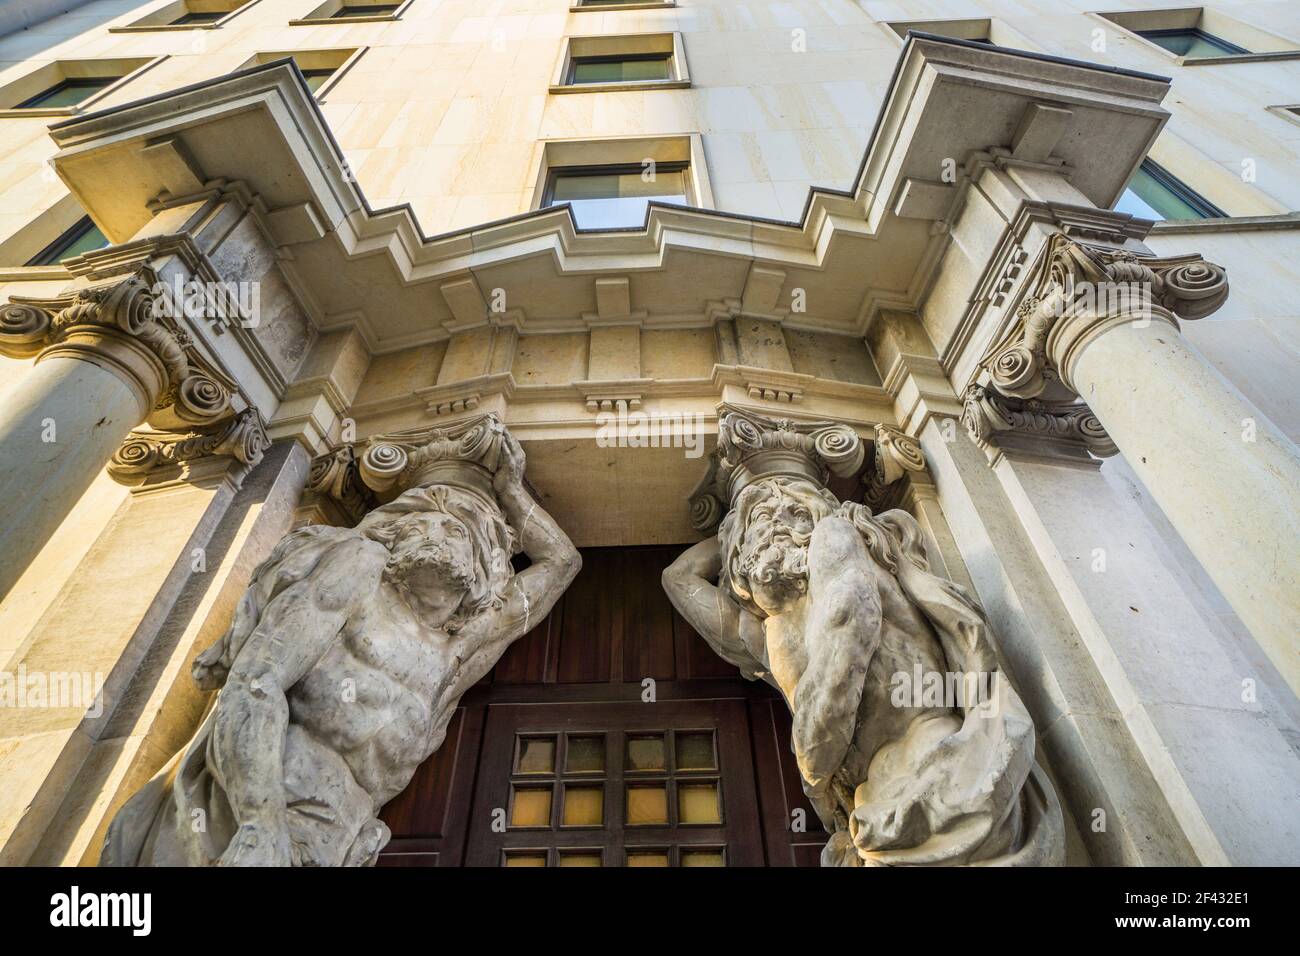 late baroque portal complex with atlantid sculptures, formerly from the house 'Zum güldenen Kreuz', integrated in the facade of a modern commercial bu Stock Photo